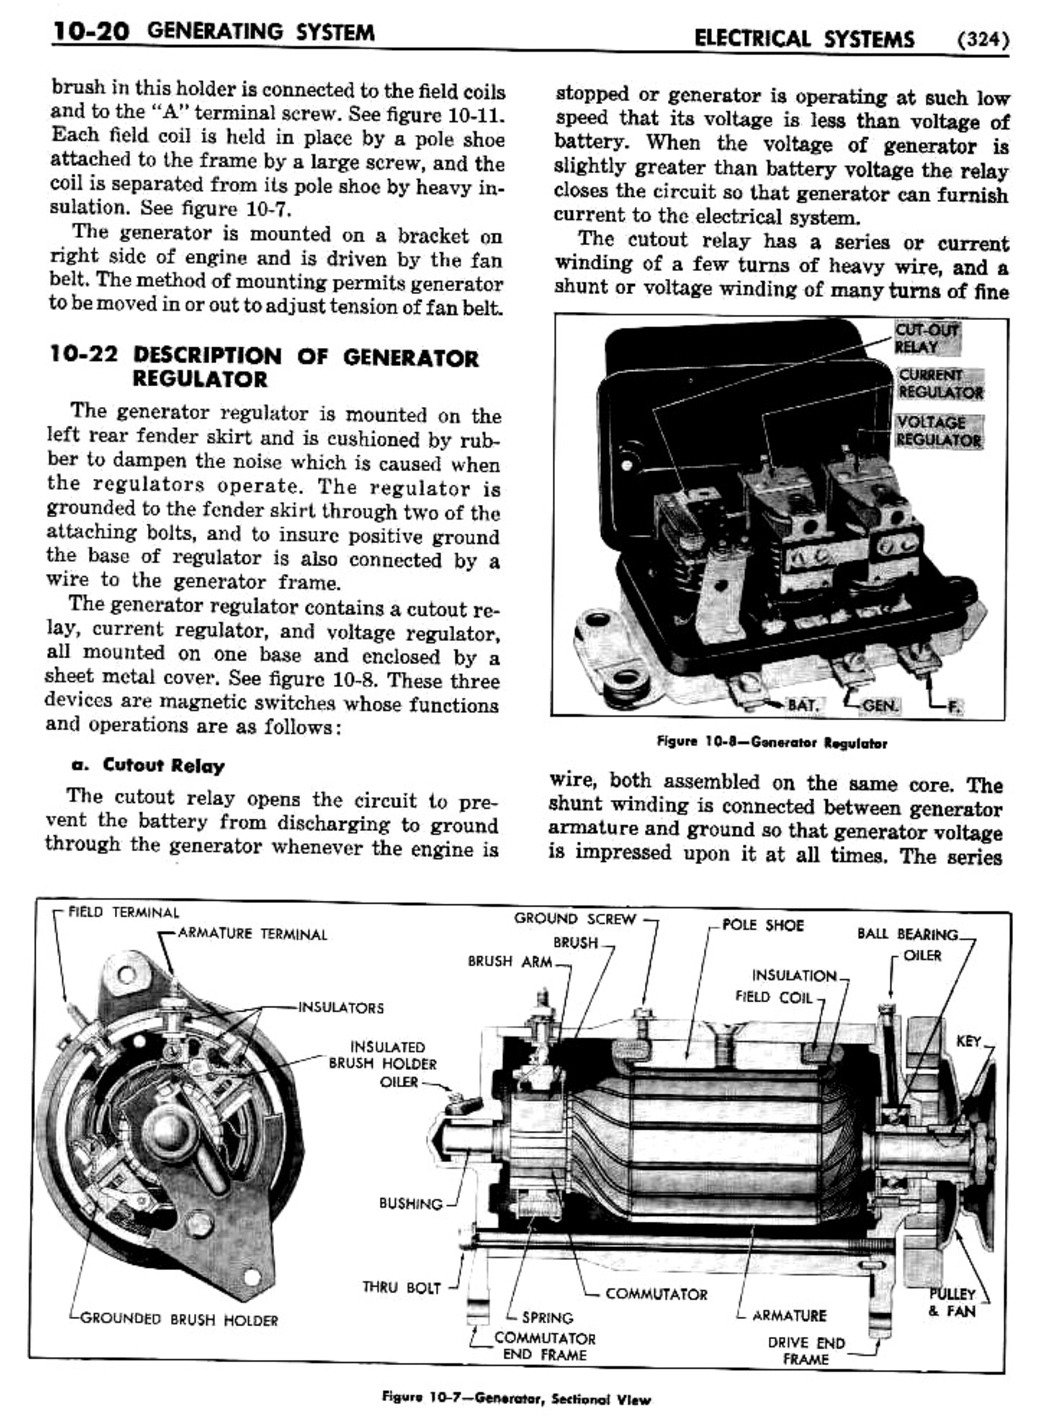 n_11 1955 Buick Shop Manual - Electrical Systems-020-020.jpg